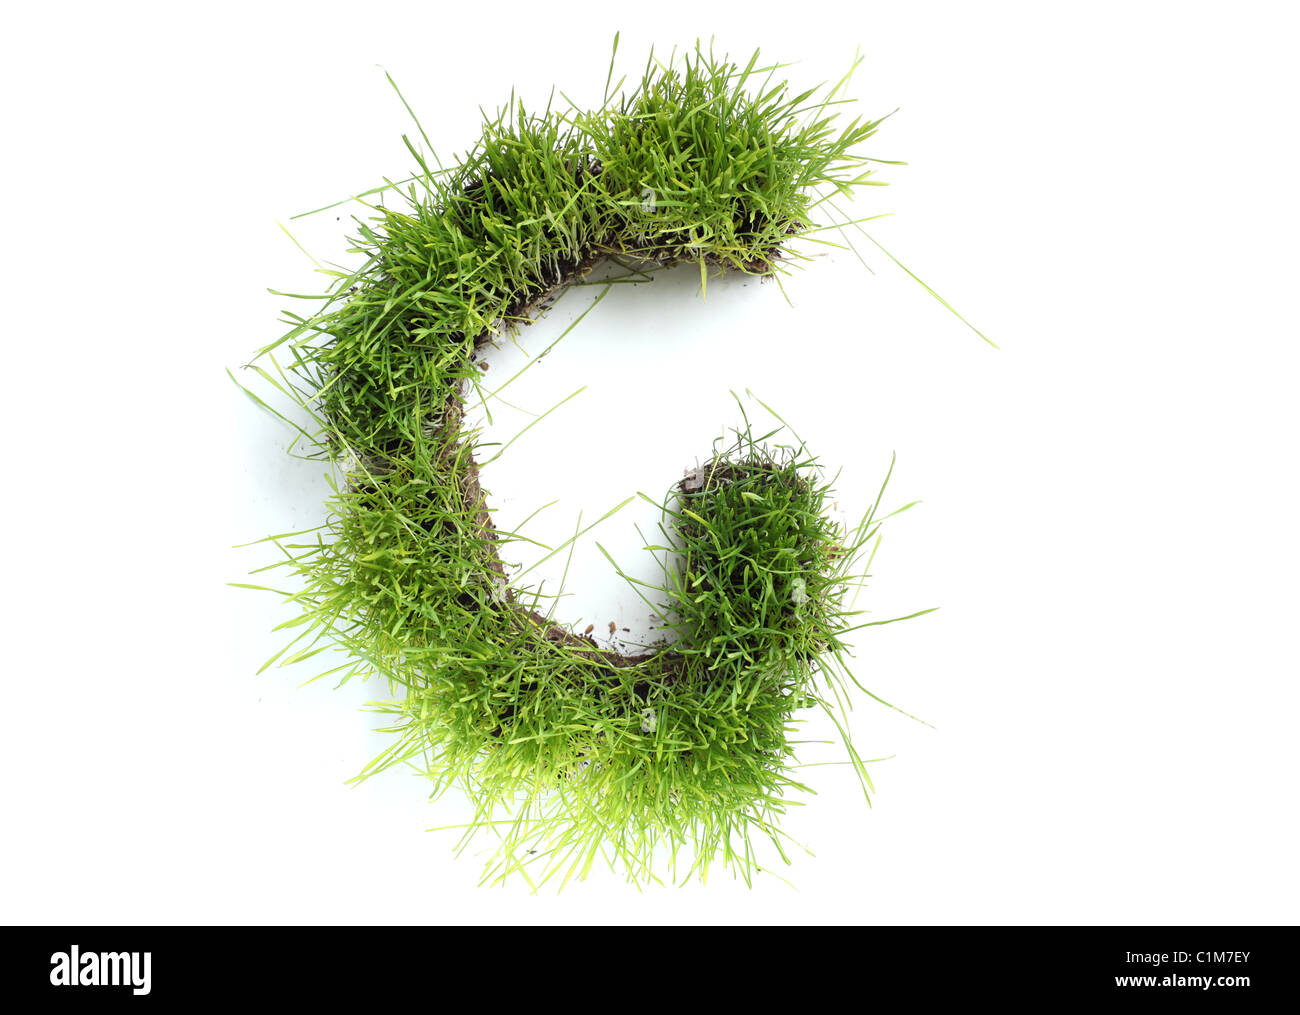 Letters made of grass - G Stock Photo